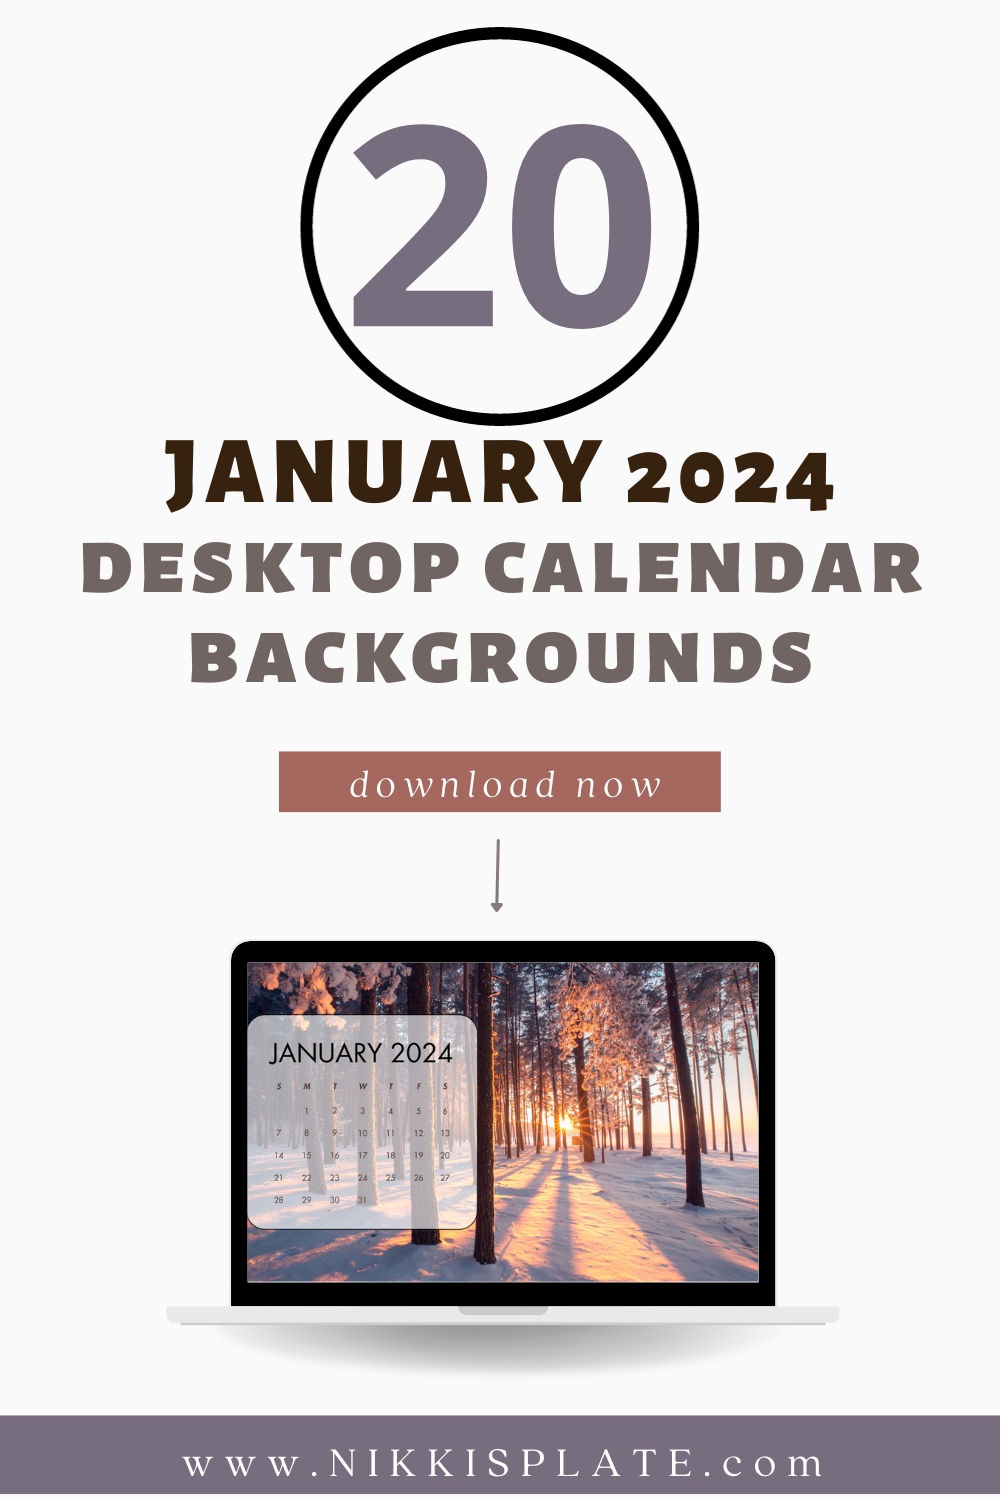 Free January 2024 Desktop Calendar Backgrounds; Here are your free January backgrounds for computers and laptops. Tech freebies for this month!